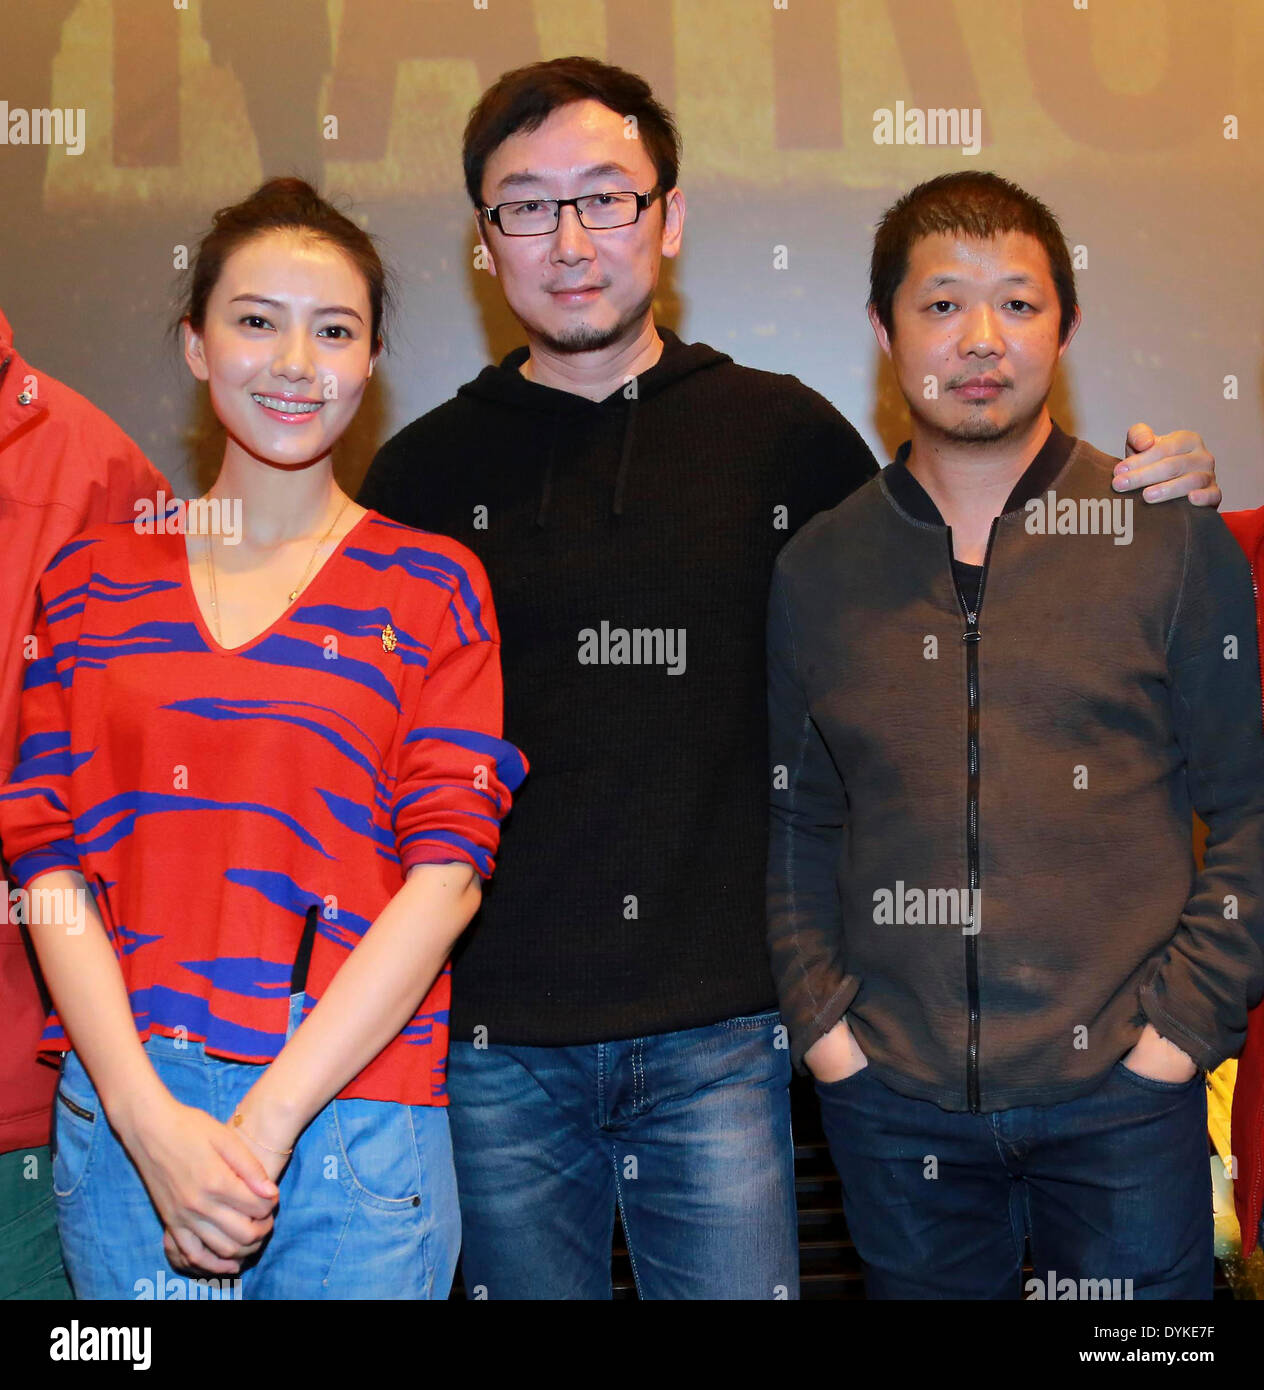 Beijing, China. 21st Apr, 2014. Actress Gao Yuanyuan (L), director Lu Chuan(C) and photographer Cao Yu pose for photos at the 10th anniversary activity of film 'Mountain Patrol' in Beijing, capital of China, April 20, 2014. Film 'Mountain Patrol', directed by Lu Chuan, was screened in China on Oct. 1, 2004. © Xinhua/Alamy Live News Stock Photo